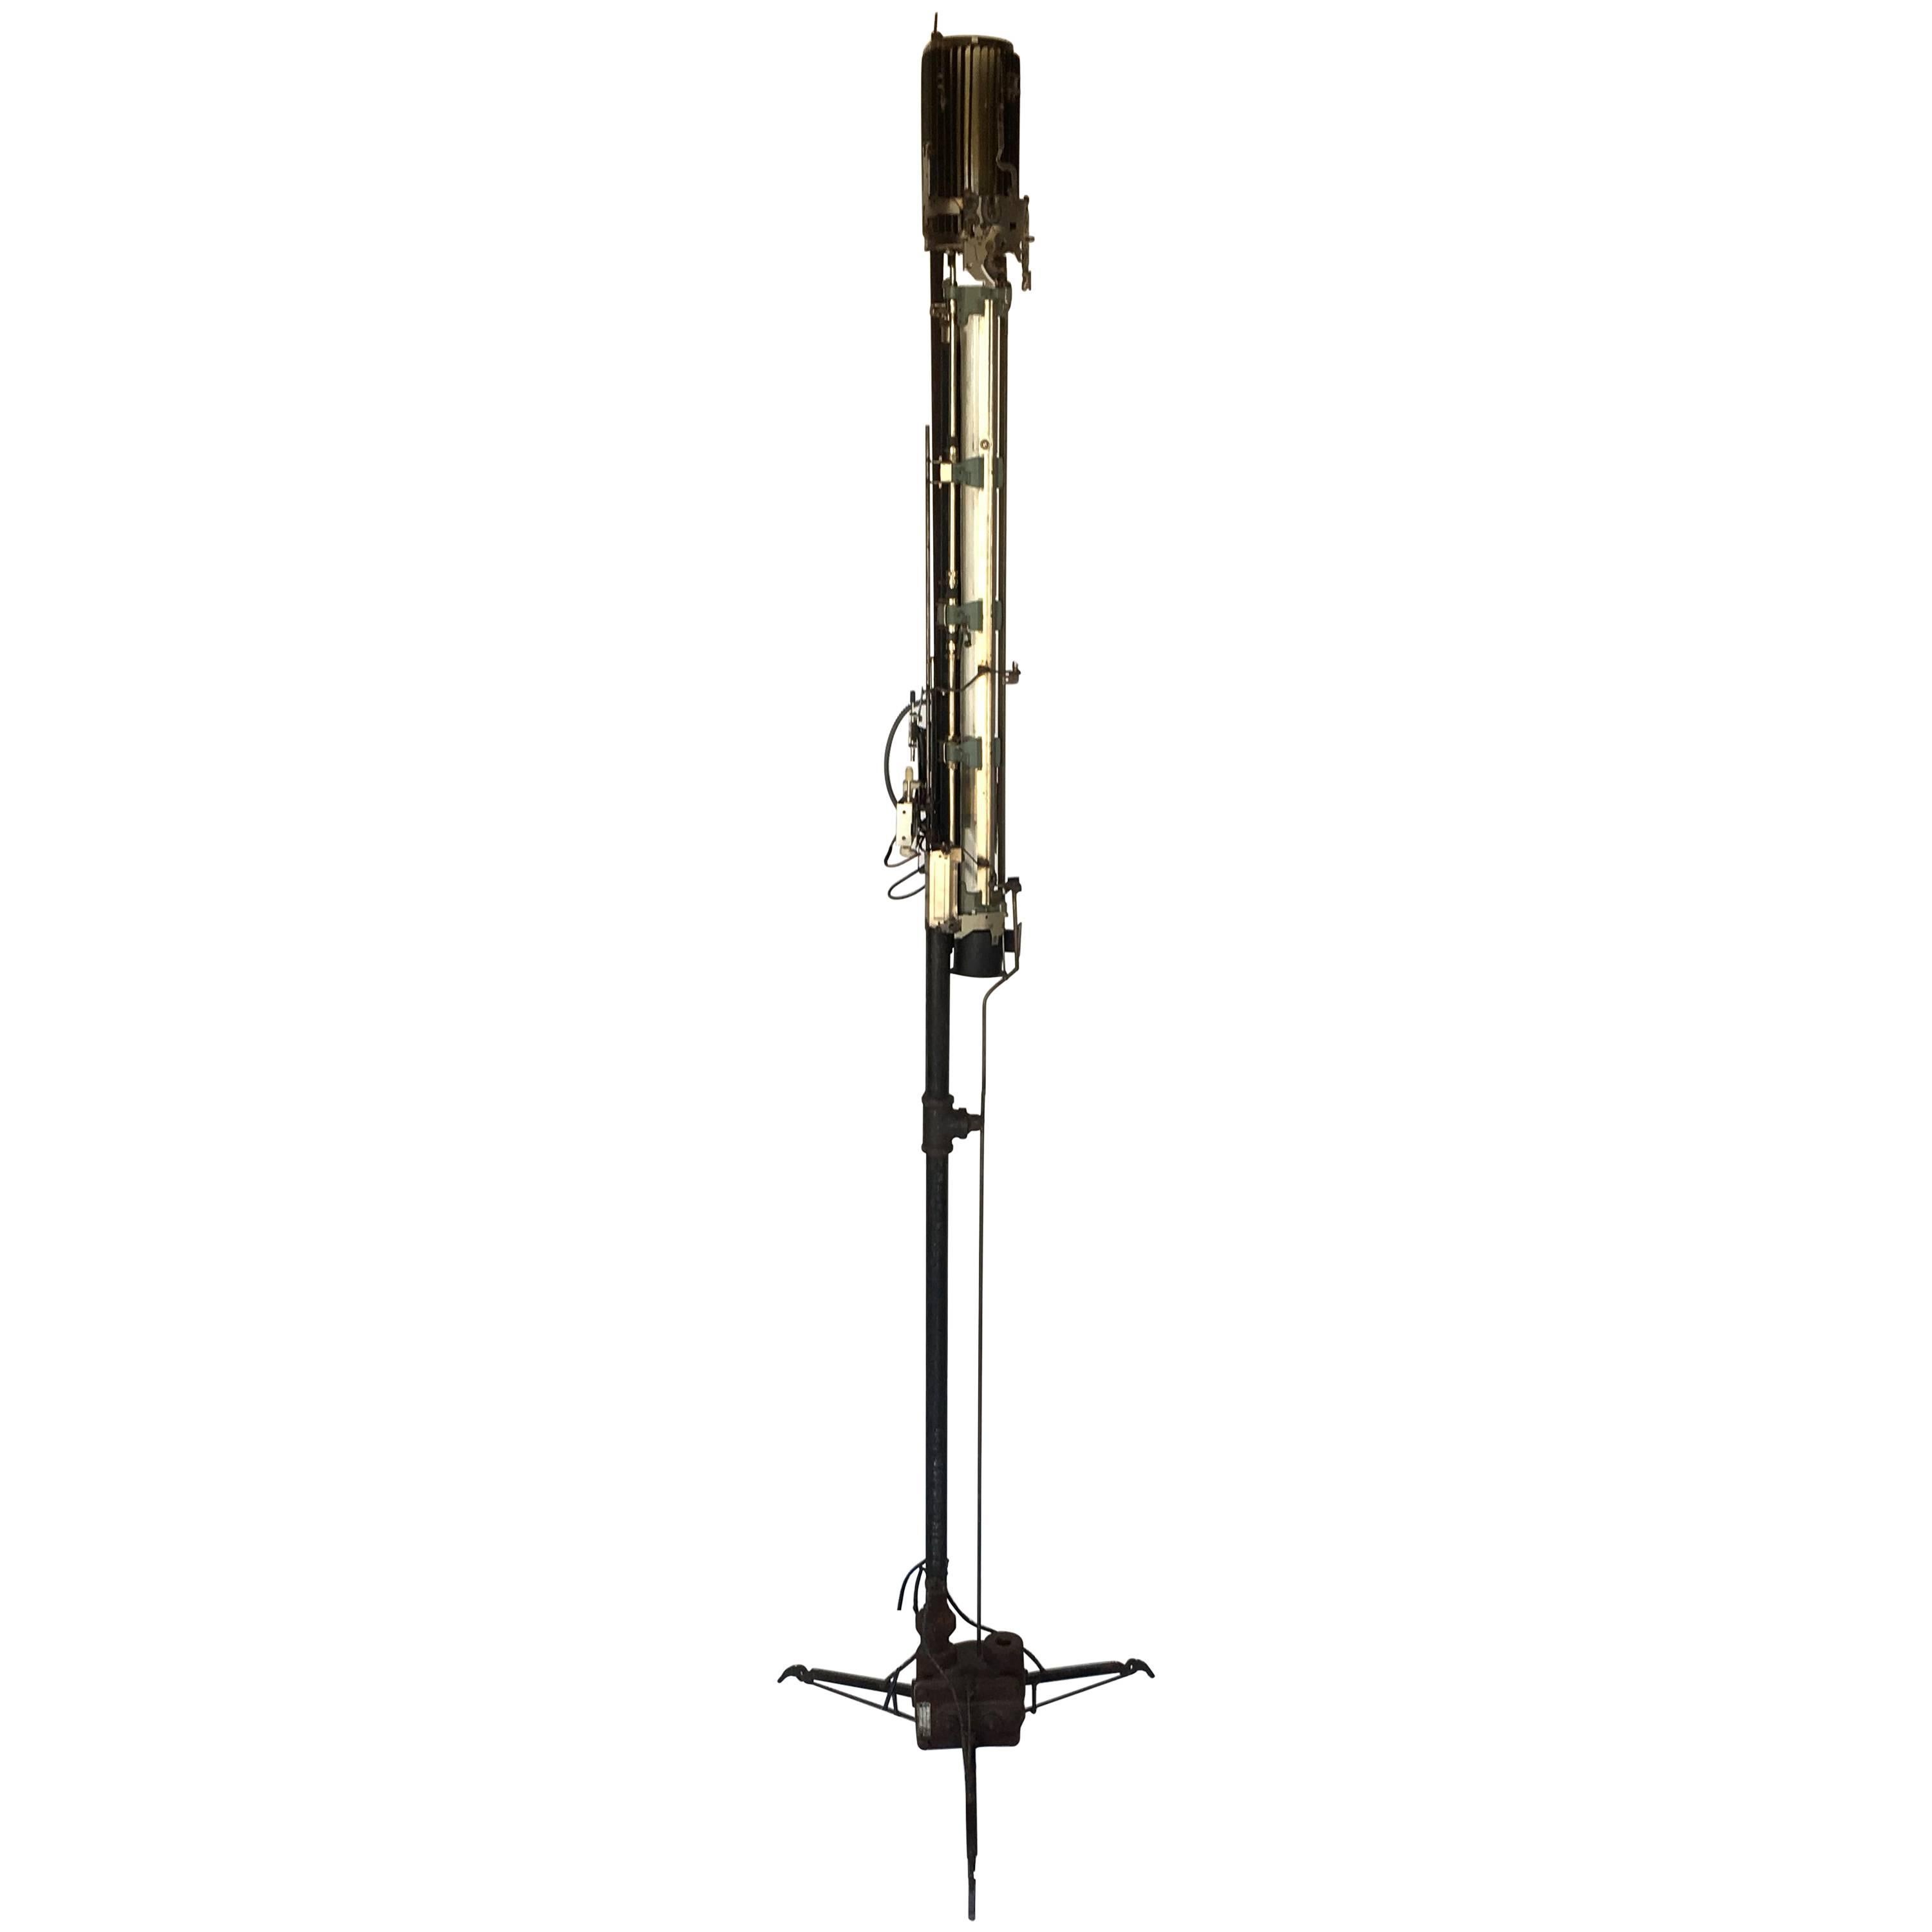 Mechanical Assemblage "Star Wars" Style Floor Lamp For Sale